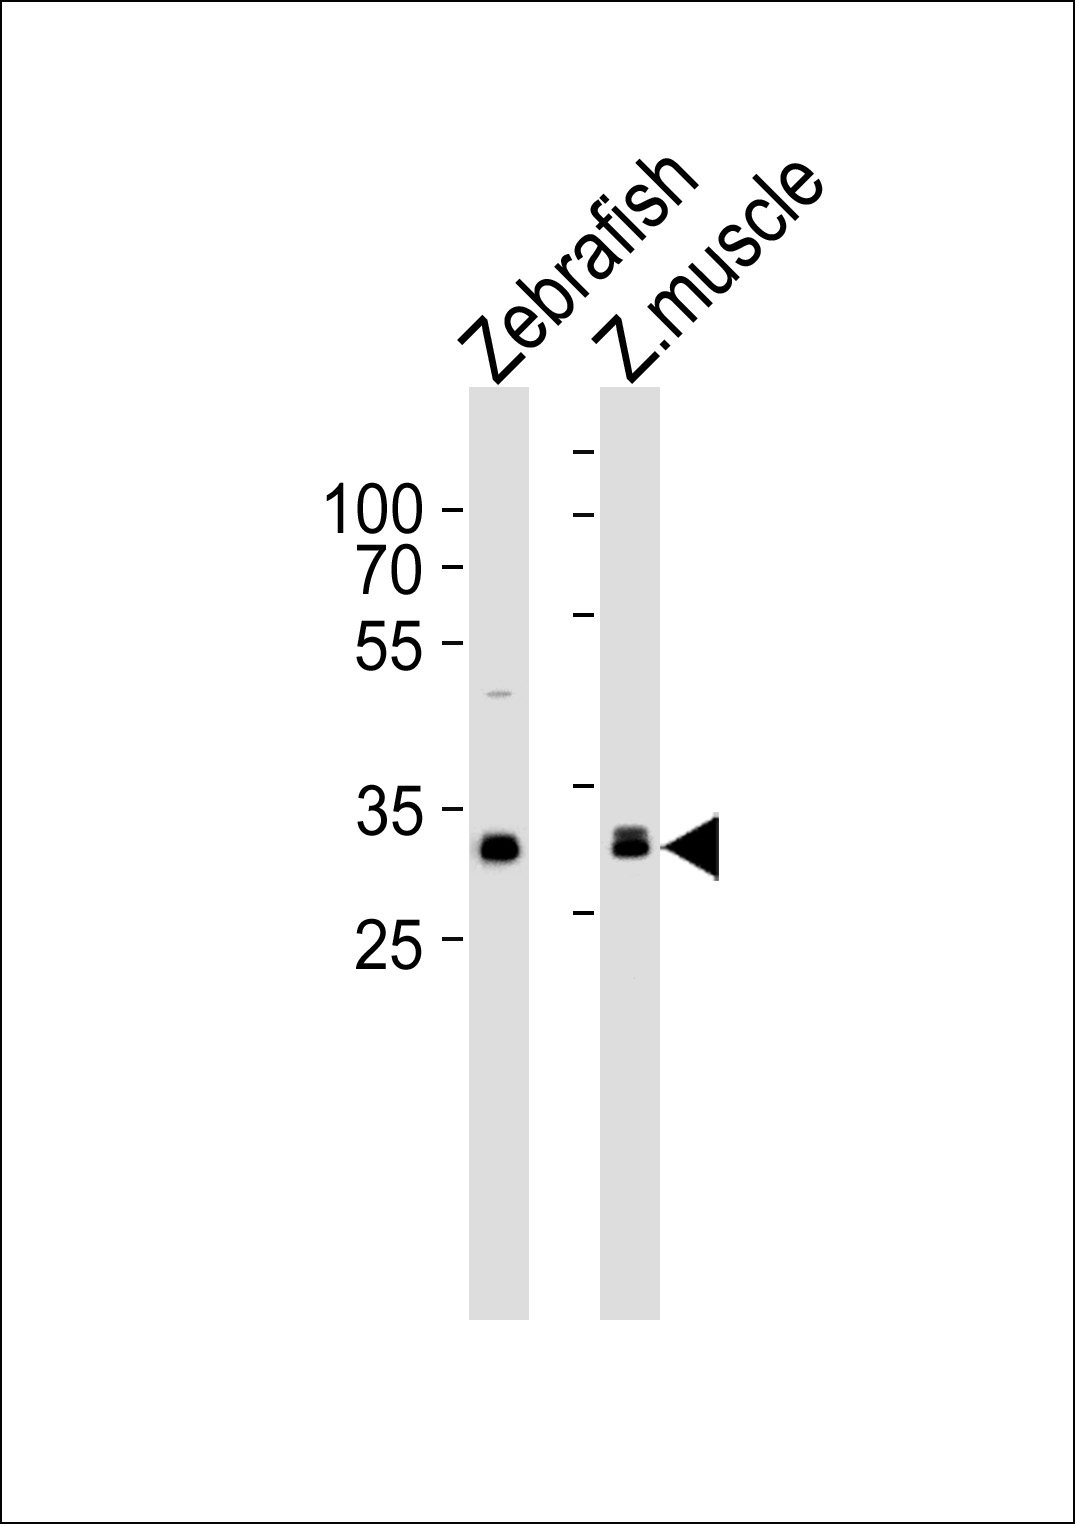 Western blot analysis of lysates from Zebrafish, zebra fish muscle tissue lysate (from left to right), using (DANRE) afmid Antibody (N-term)(Cat.  #Azb18699a).  Azb18699a was diluted at 1:1000 at each lane.  A goat anti-rabbit IgG H&L(HRP) at 1:5000 dilution was used as the secondary antibody. Lysates at 35ug per lane.